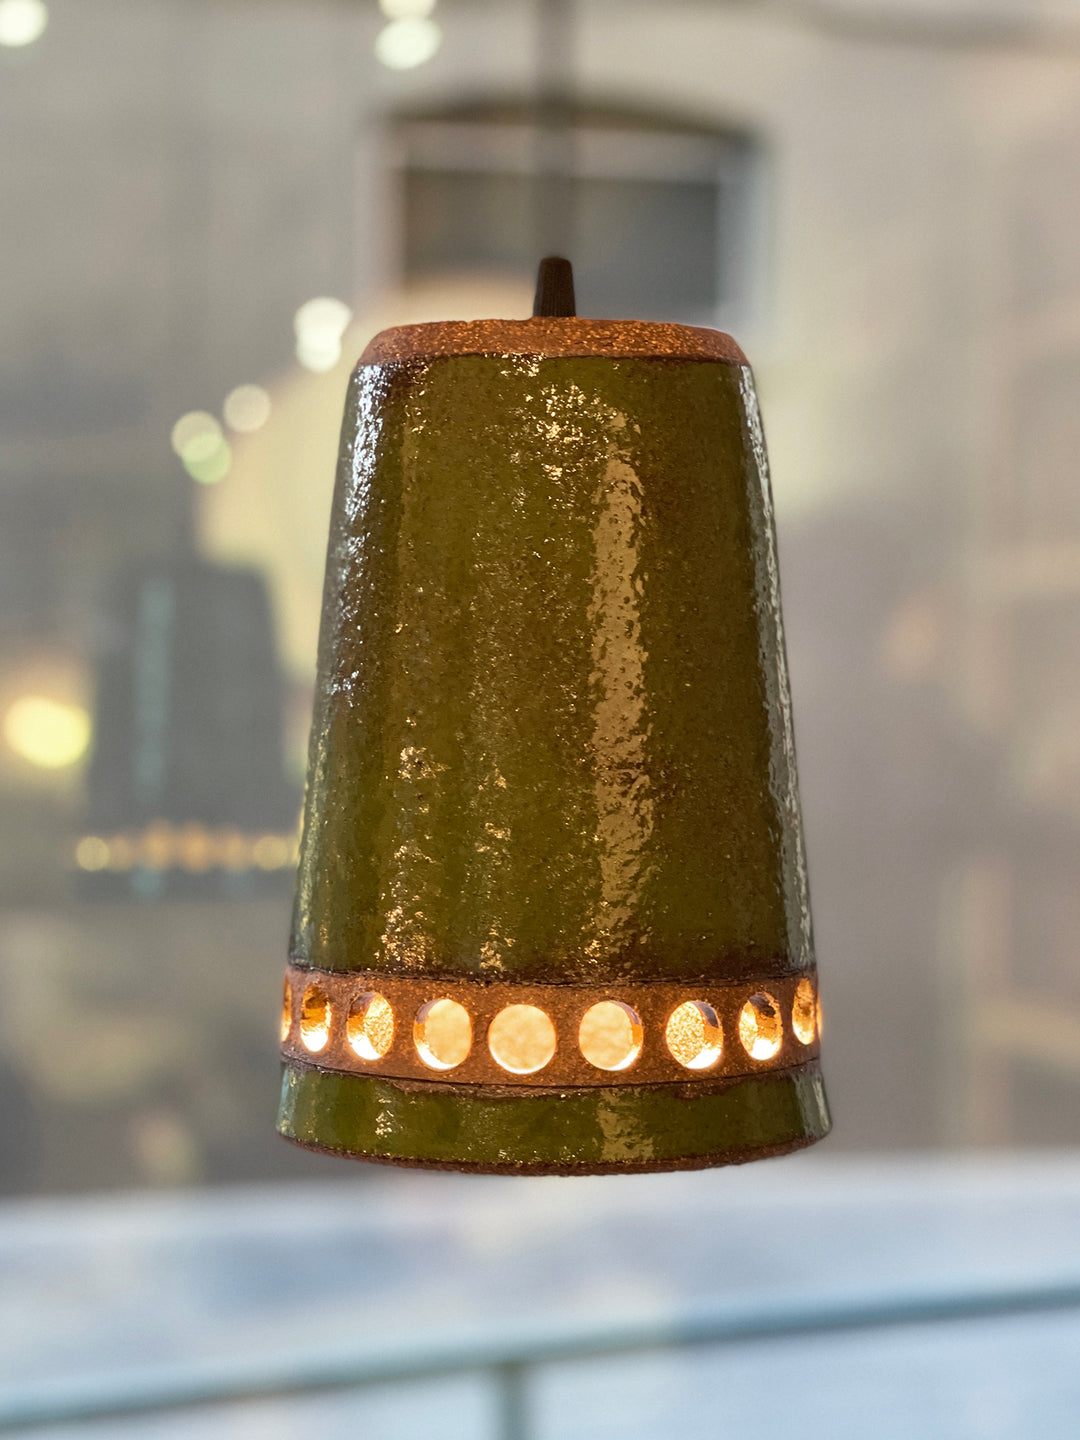 Hand Thrown Hanging Pottery Pendant Lamp with Cut Out Detailing